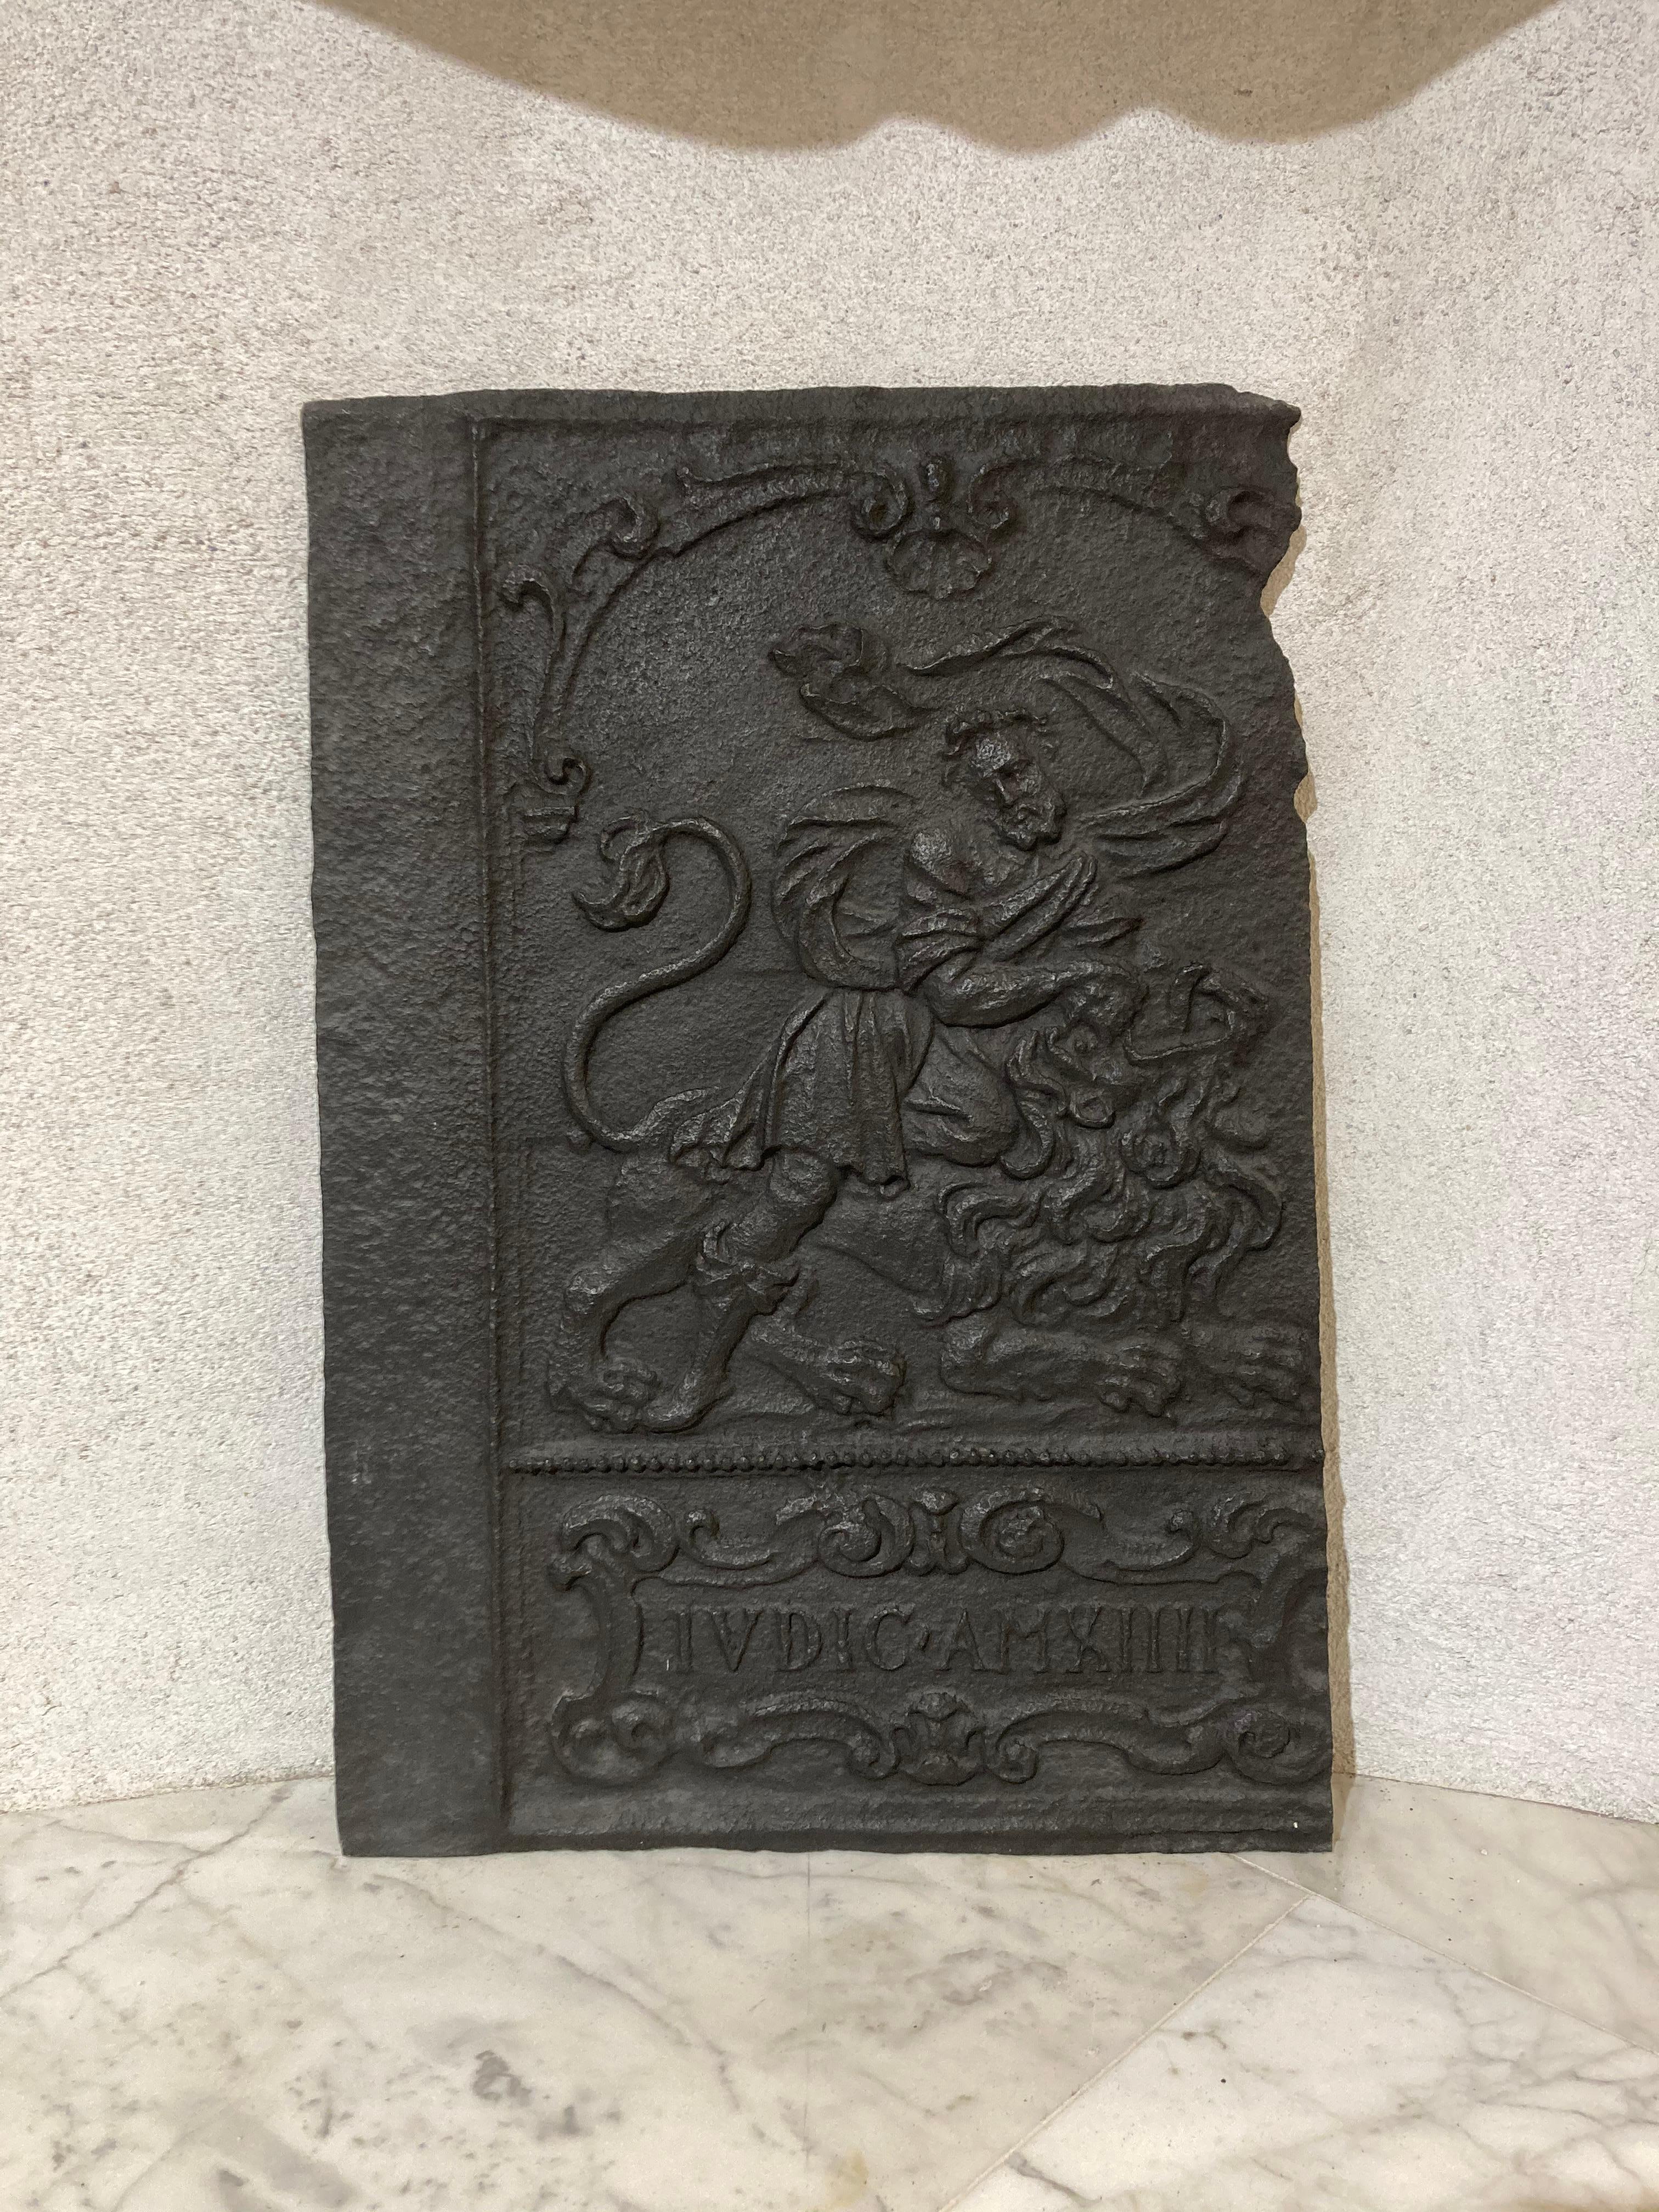 A nice and tall decorative fireback or backsplash.
This was originally a sides of an old cast iron stove from the 17th century.
In the early 19th century these decorative stove where take apart, the sides where used as fireback because of their